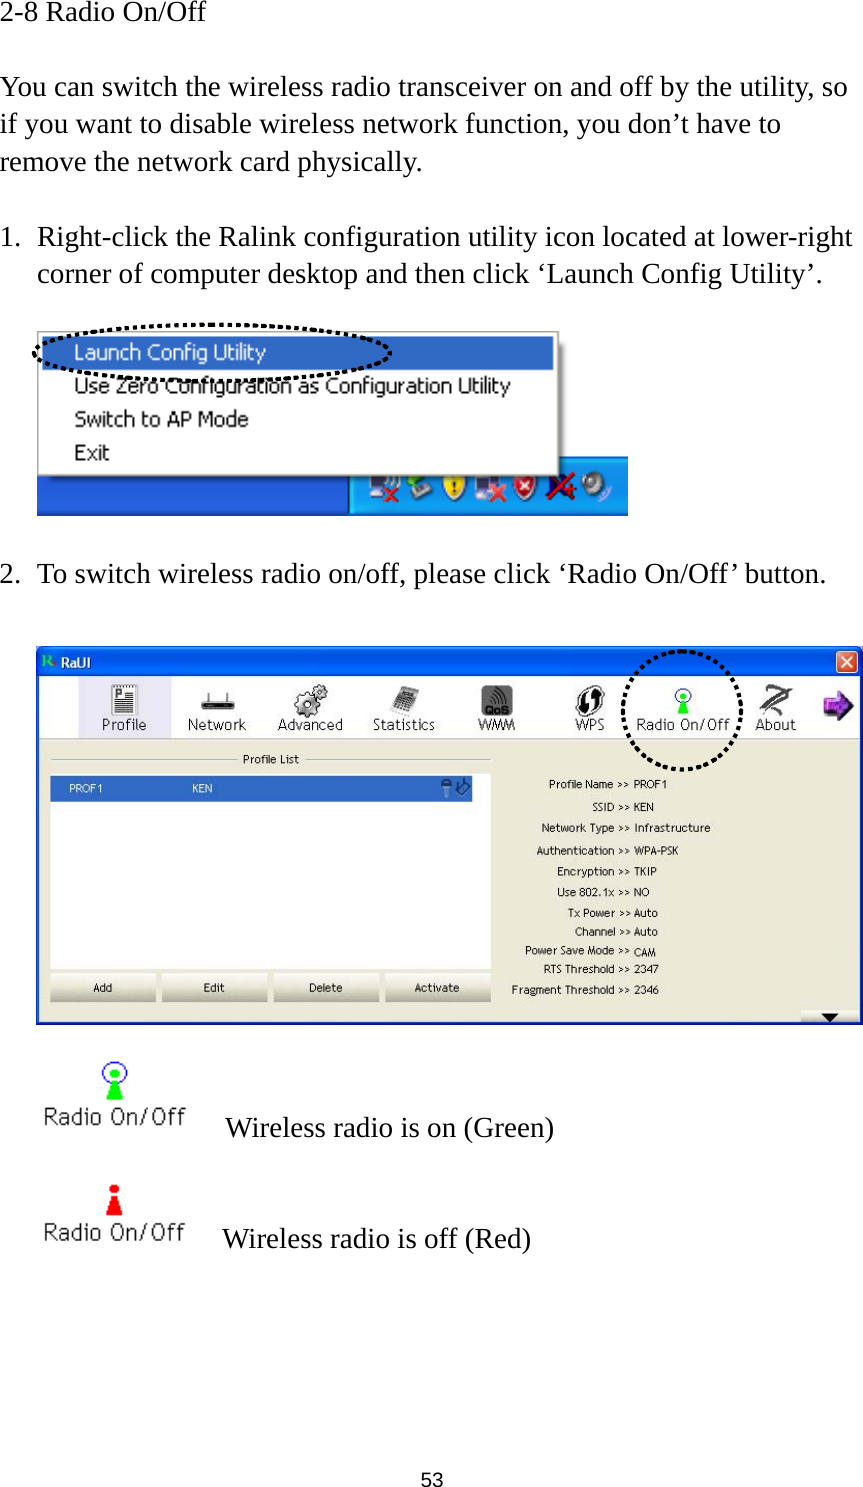  53 2-8 Radio On/Off  You can switch the wireless radio transceiver on and off by the utility, so if you want to disable wireless network function, you don’t have to remove the network card physically.  1. Right-click the Ralink configuration utility icon located at lower-right corner of computer desktop and then click ‘Launch Config Utility’.    2. To switch wireless radio on/off, please click ‘Radio On/Off’ button.       Wireless radio is on (Green)     Wireless radio is off (Red) 